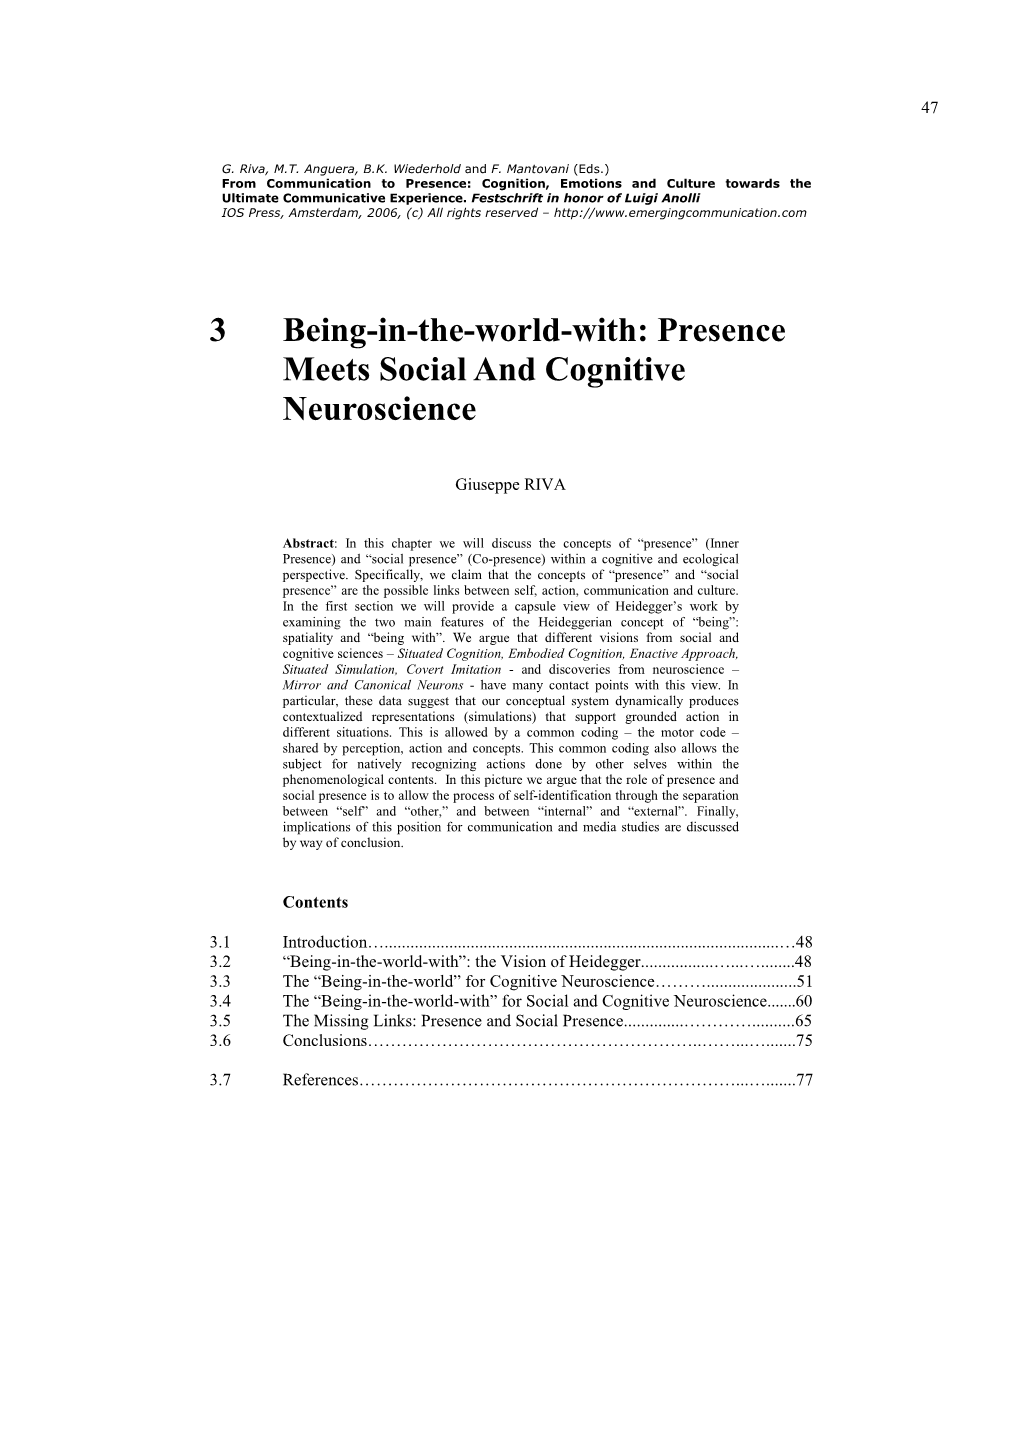 Presence Meets Social and Cognitive Neuroscience